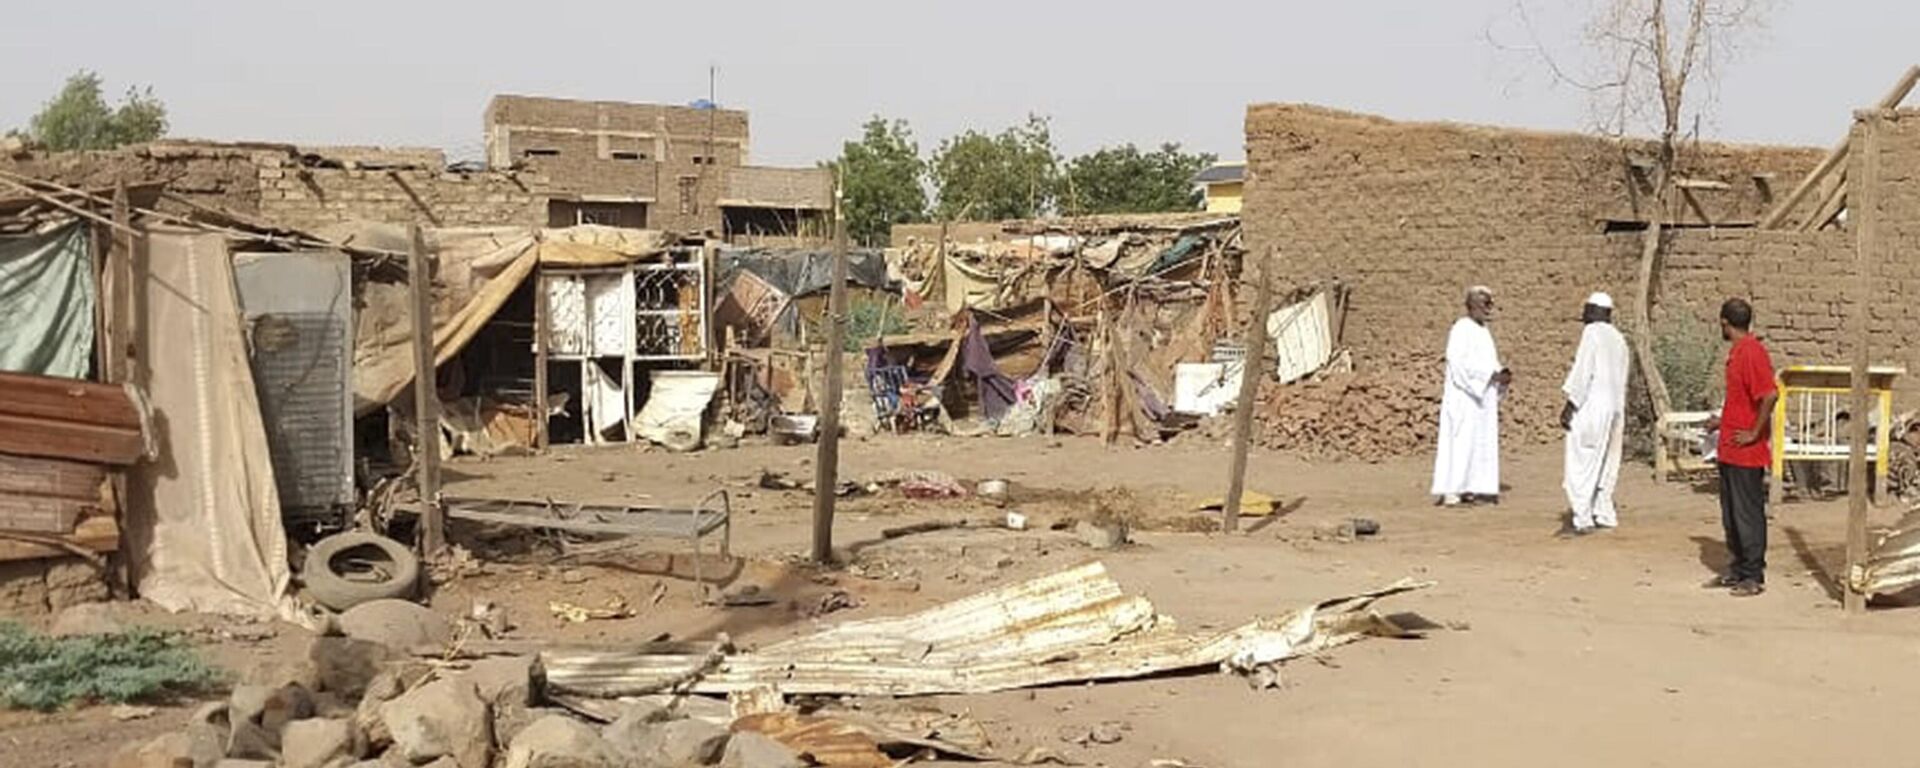 People check the rubble of their destroyed home after strikes at Allamat district in Khartoum, Sudan, Thursday, June 1, 2023. The White House says it's imposing sanctions against key defense companies and people who “perpetuate violence” in Sudan as the warring sides fail to abide by a cease-fire agreement in the northeastern African nation.  - Sputnik Africa, 1920, 10.12.2023